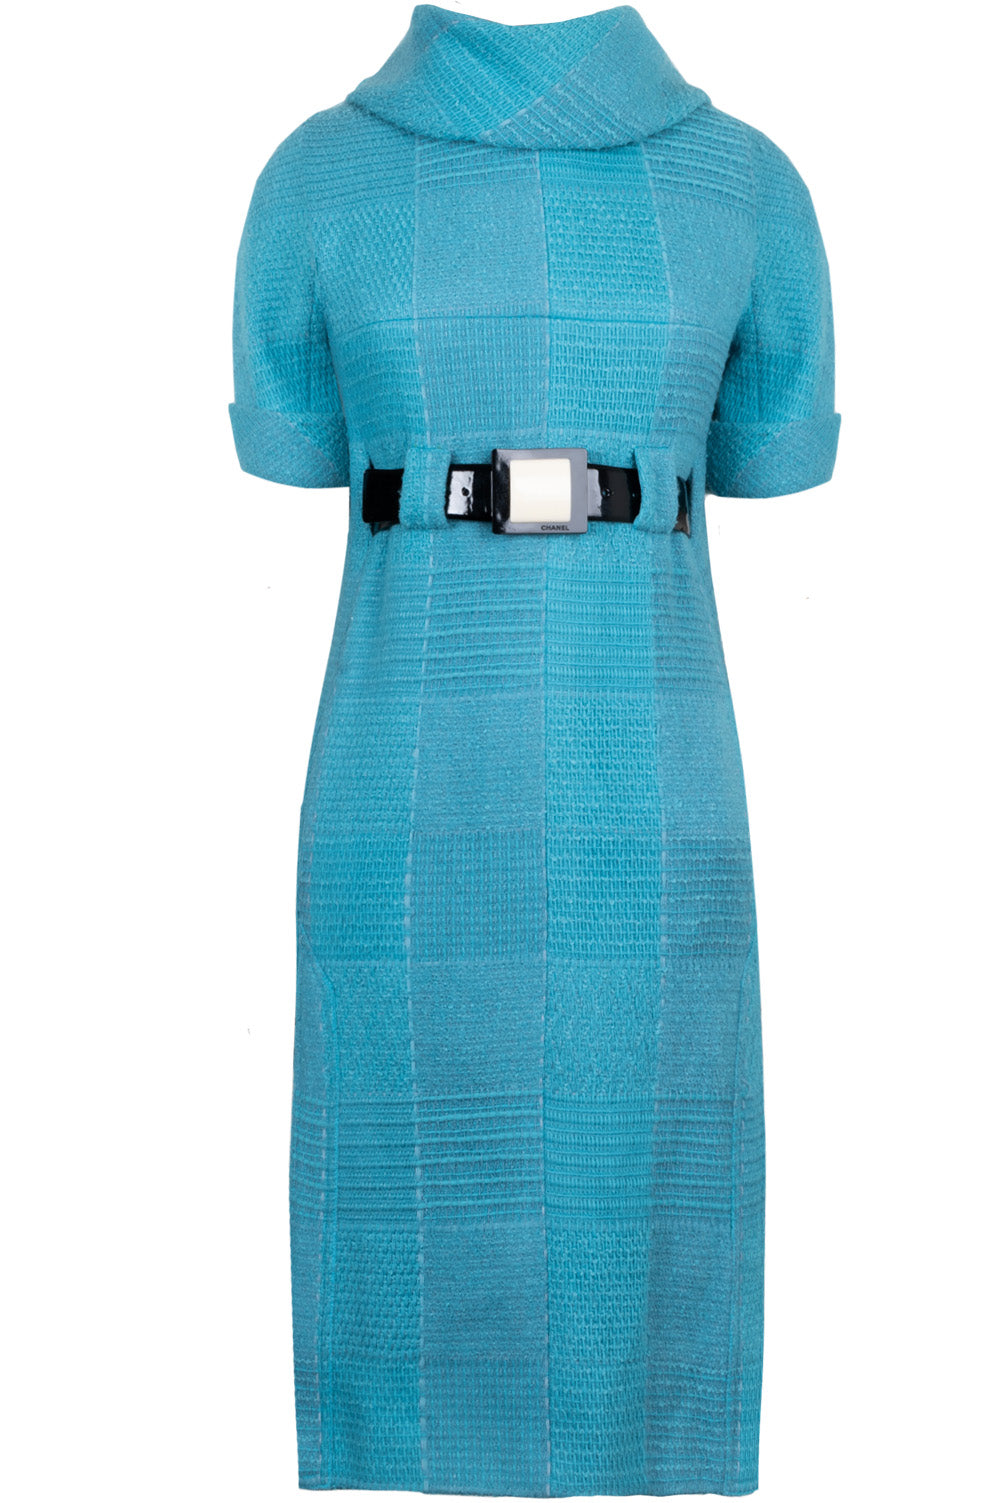 CHANEL Dress with Belt Tweed Bright Blue 07 Autumn